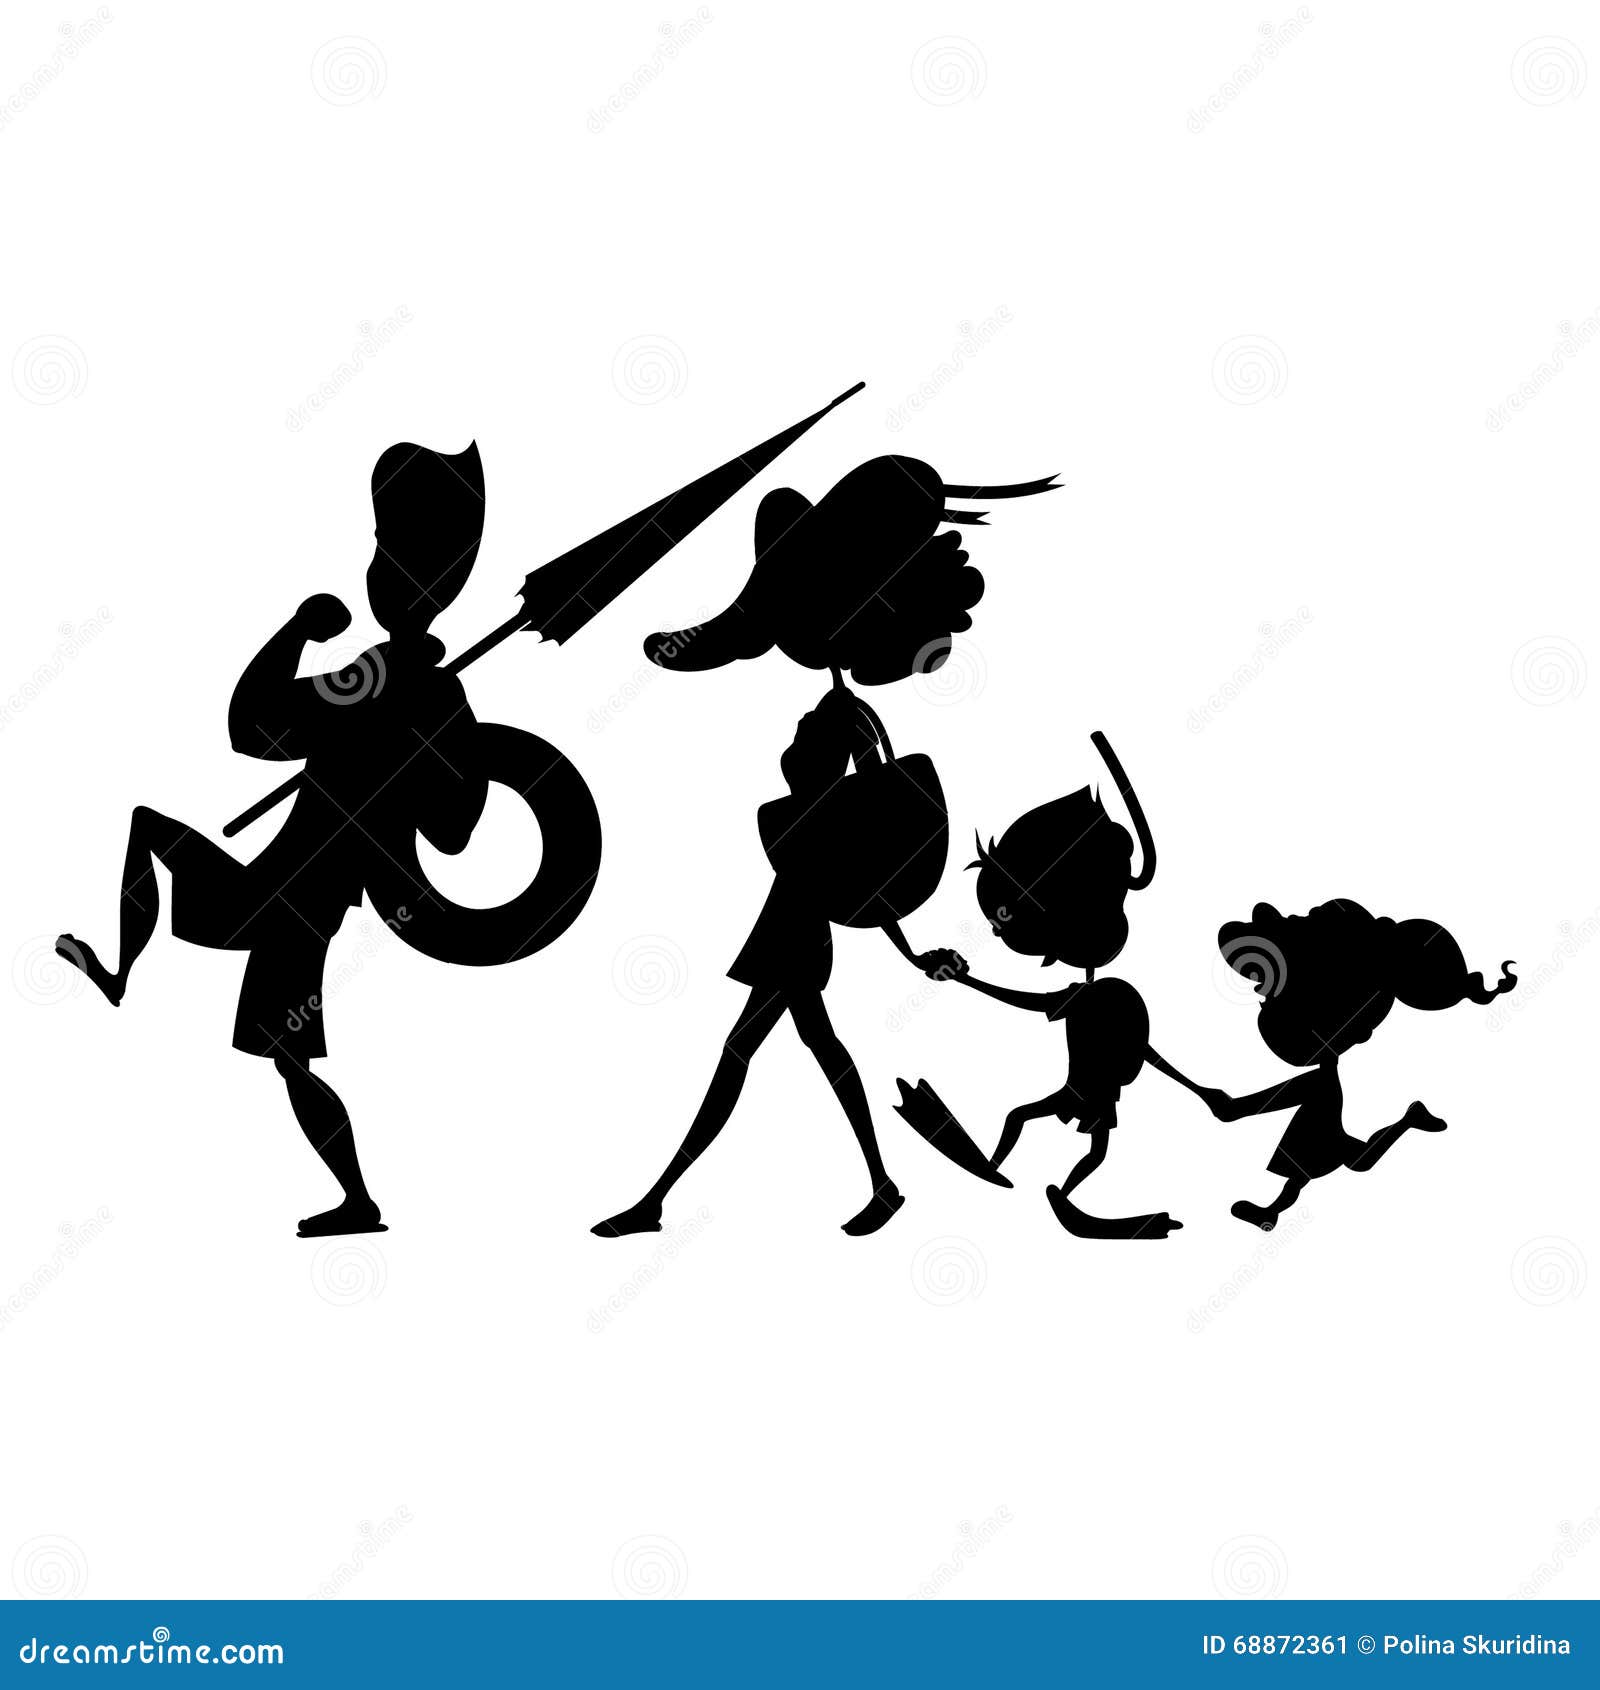 free clipart of family walking - photo #40